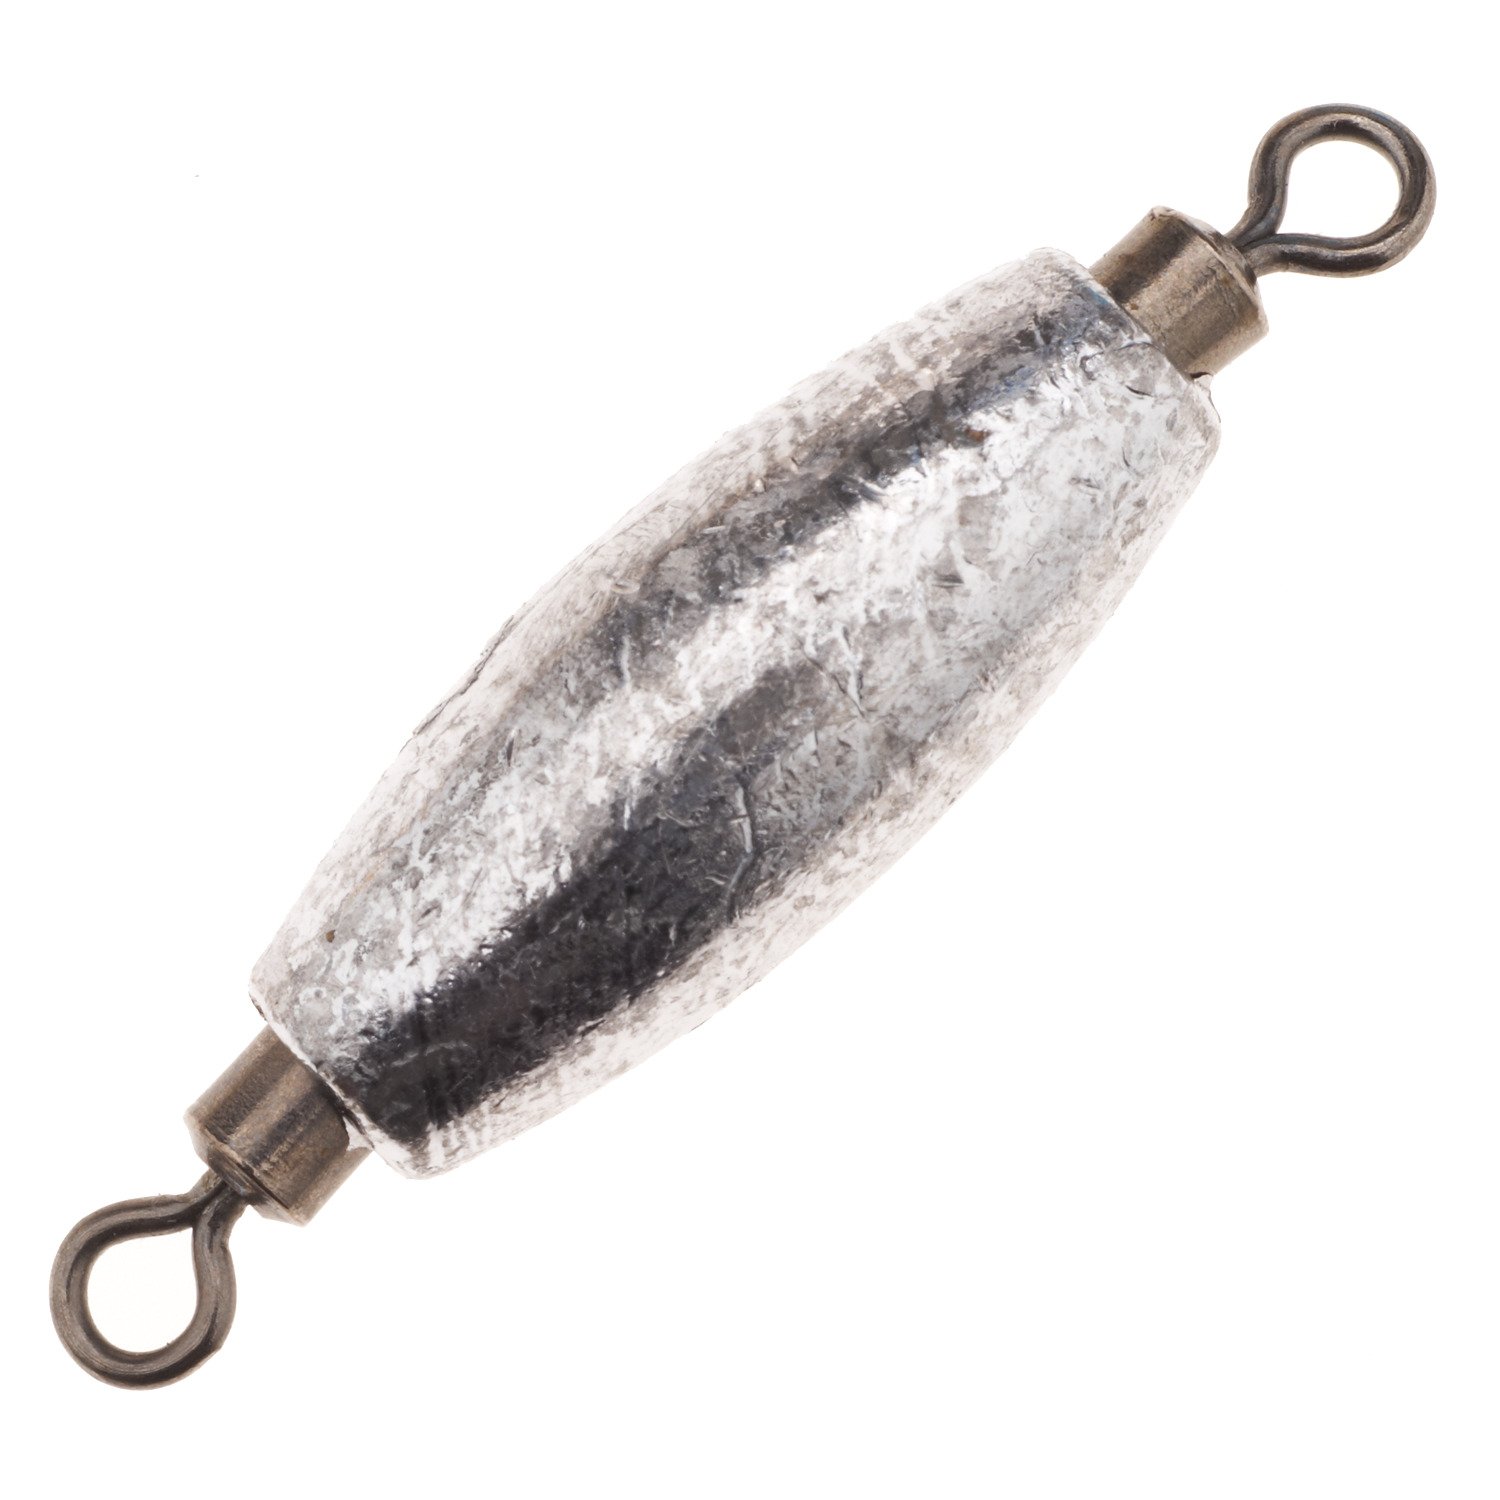  Catfish Sumo Flat No-Roll Lead Sinker Weights with